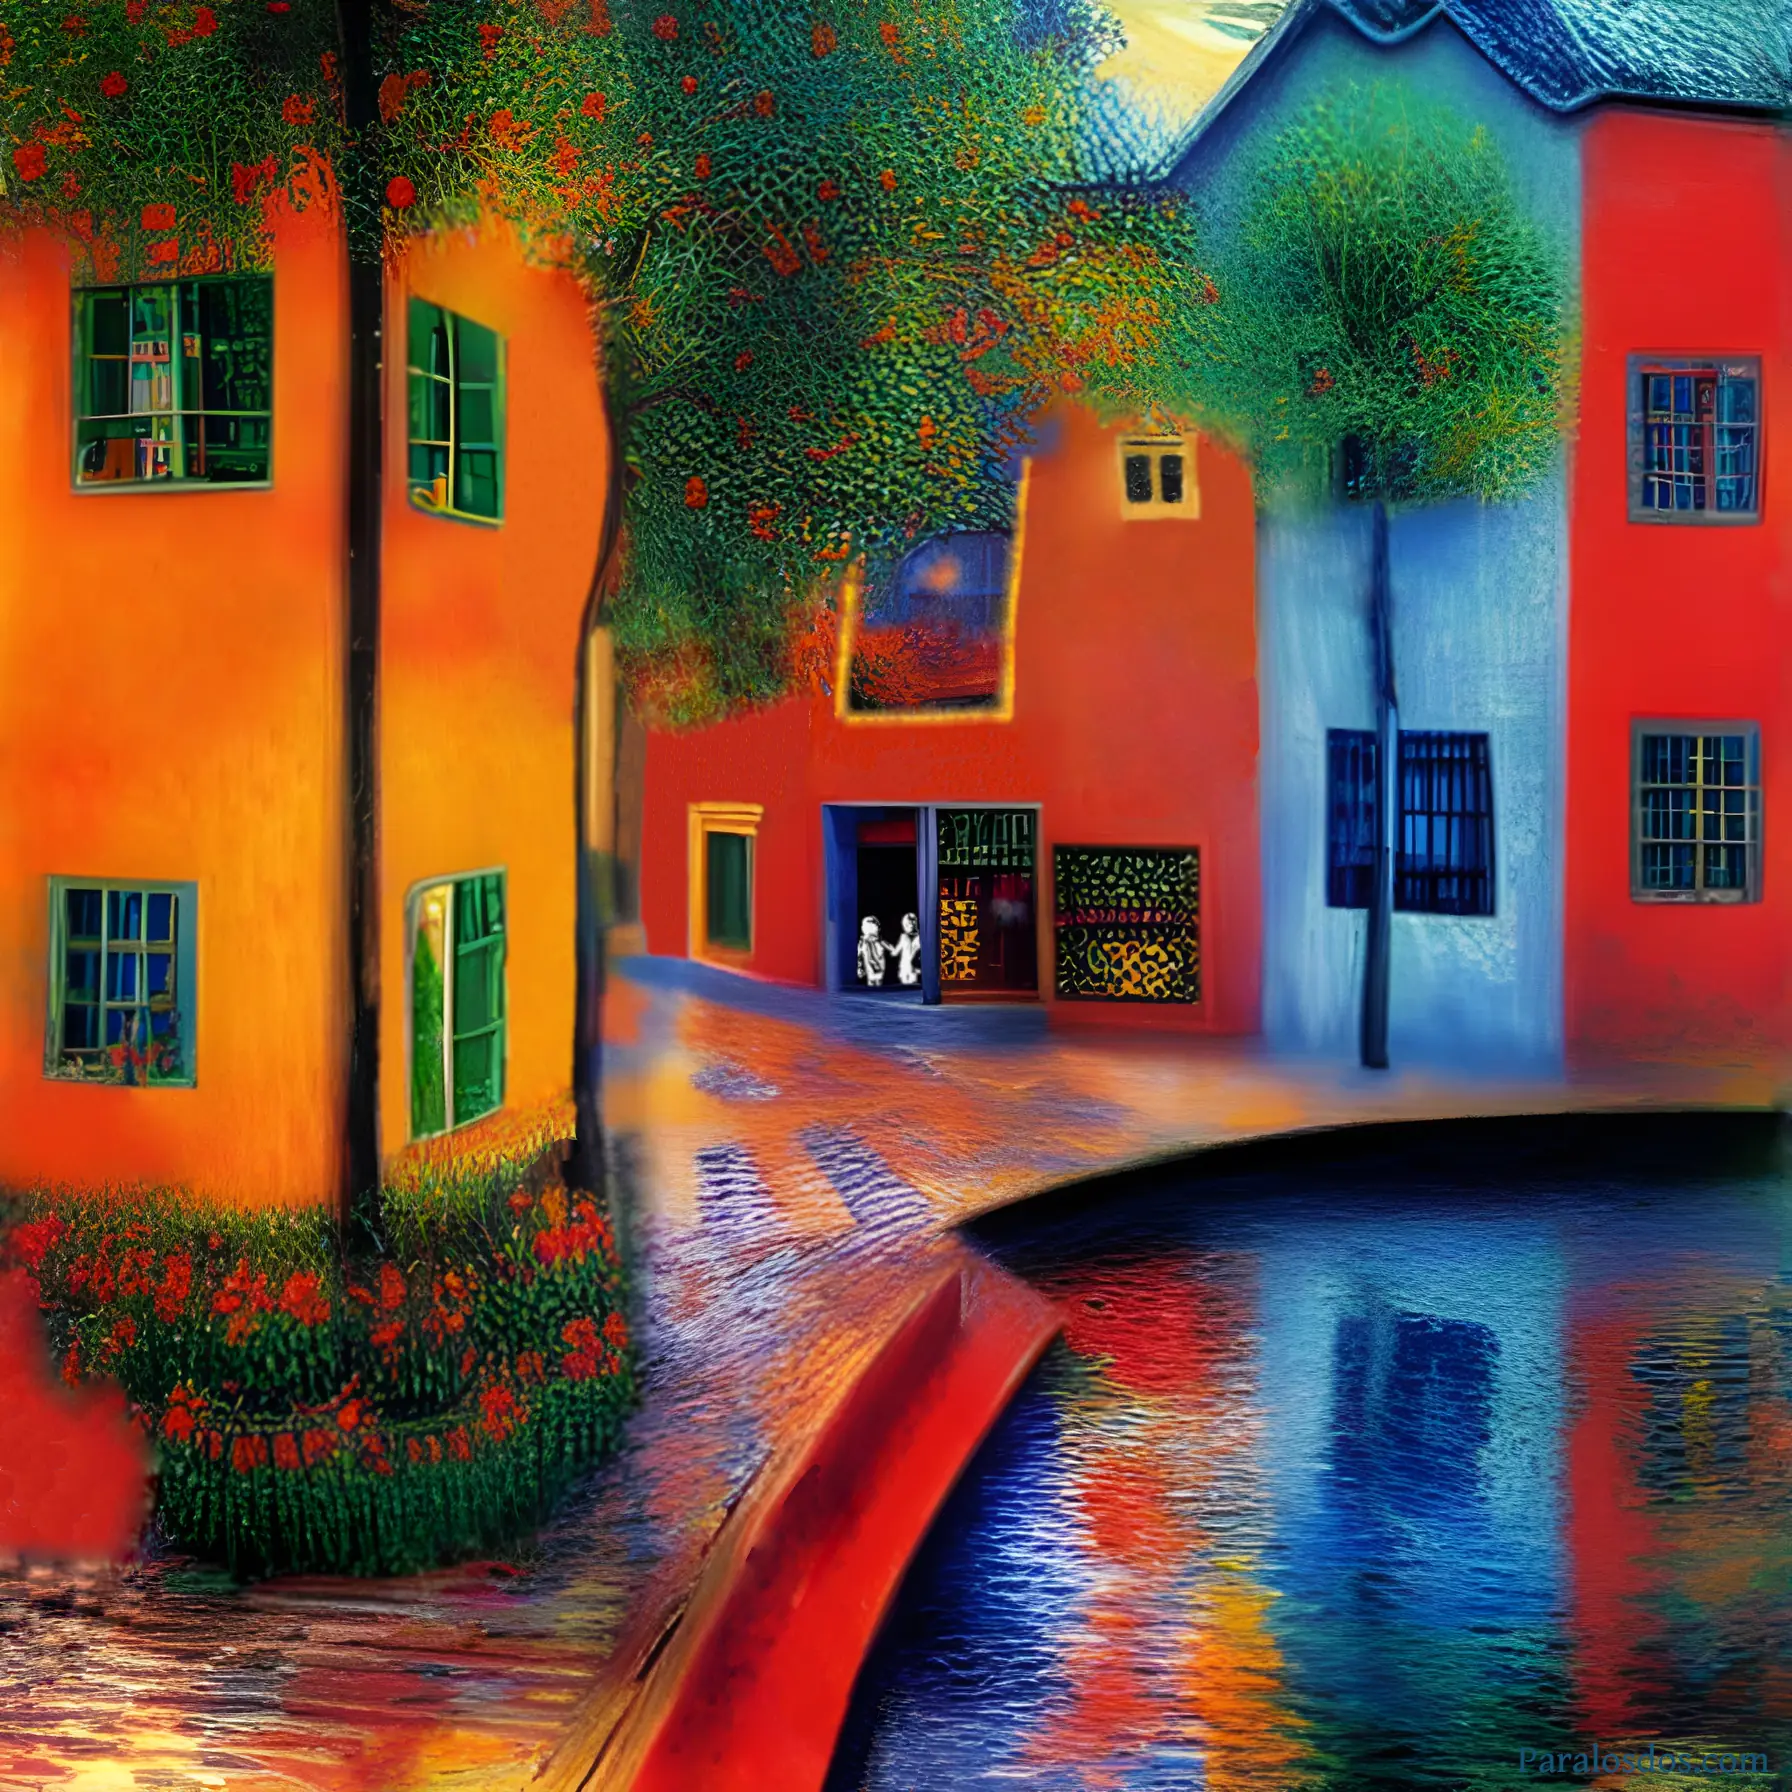 An artistic rendering of a few buildings in a colourful village. The paths are only for walking, and the homes are beside a small body of water.